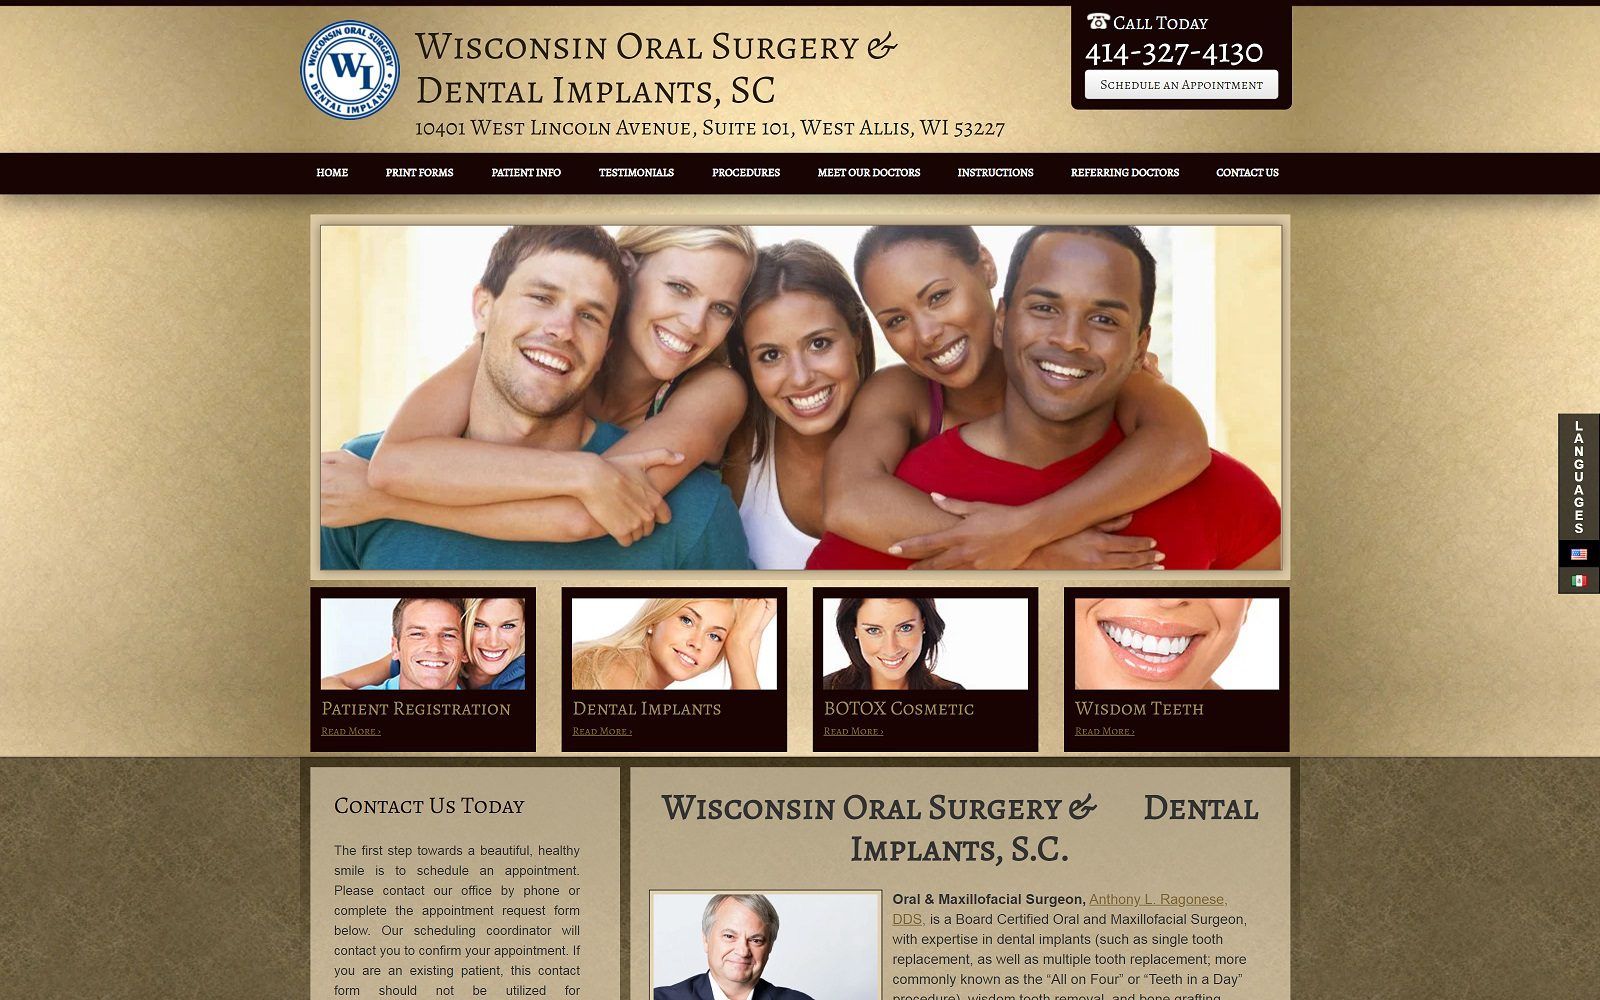 The Screenshot of Wisconsin Oral Surgery & Dental Implants, S.C. Anthony L. Ragonese, DDS Website